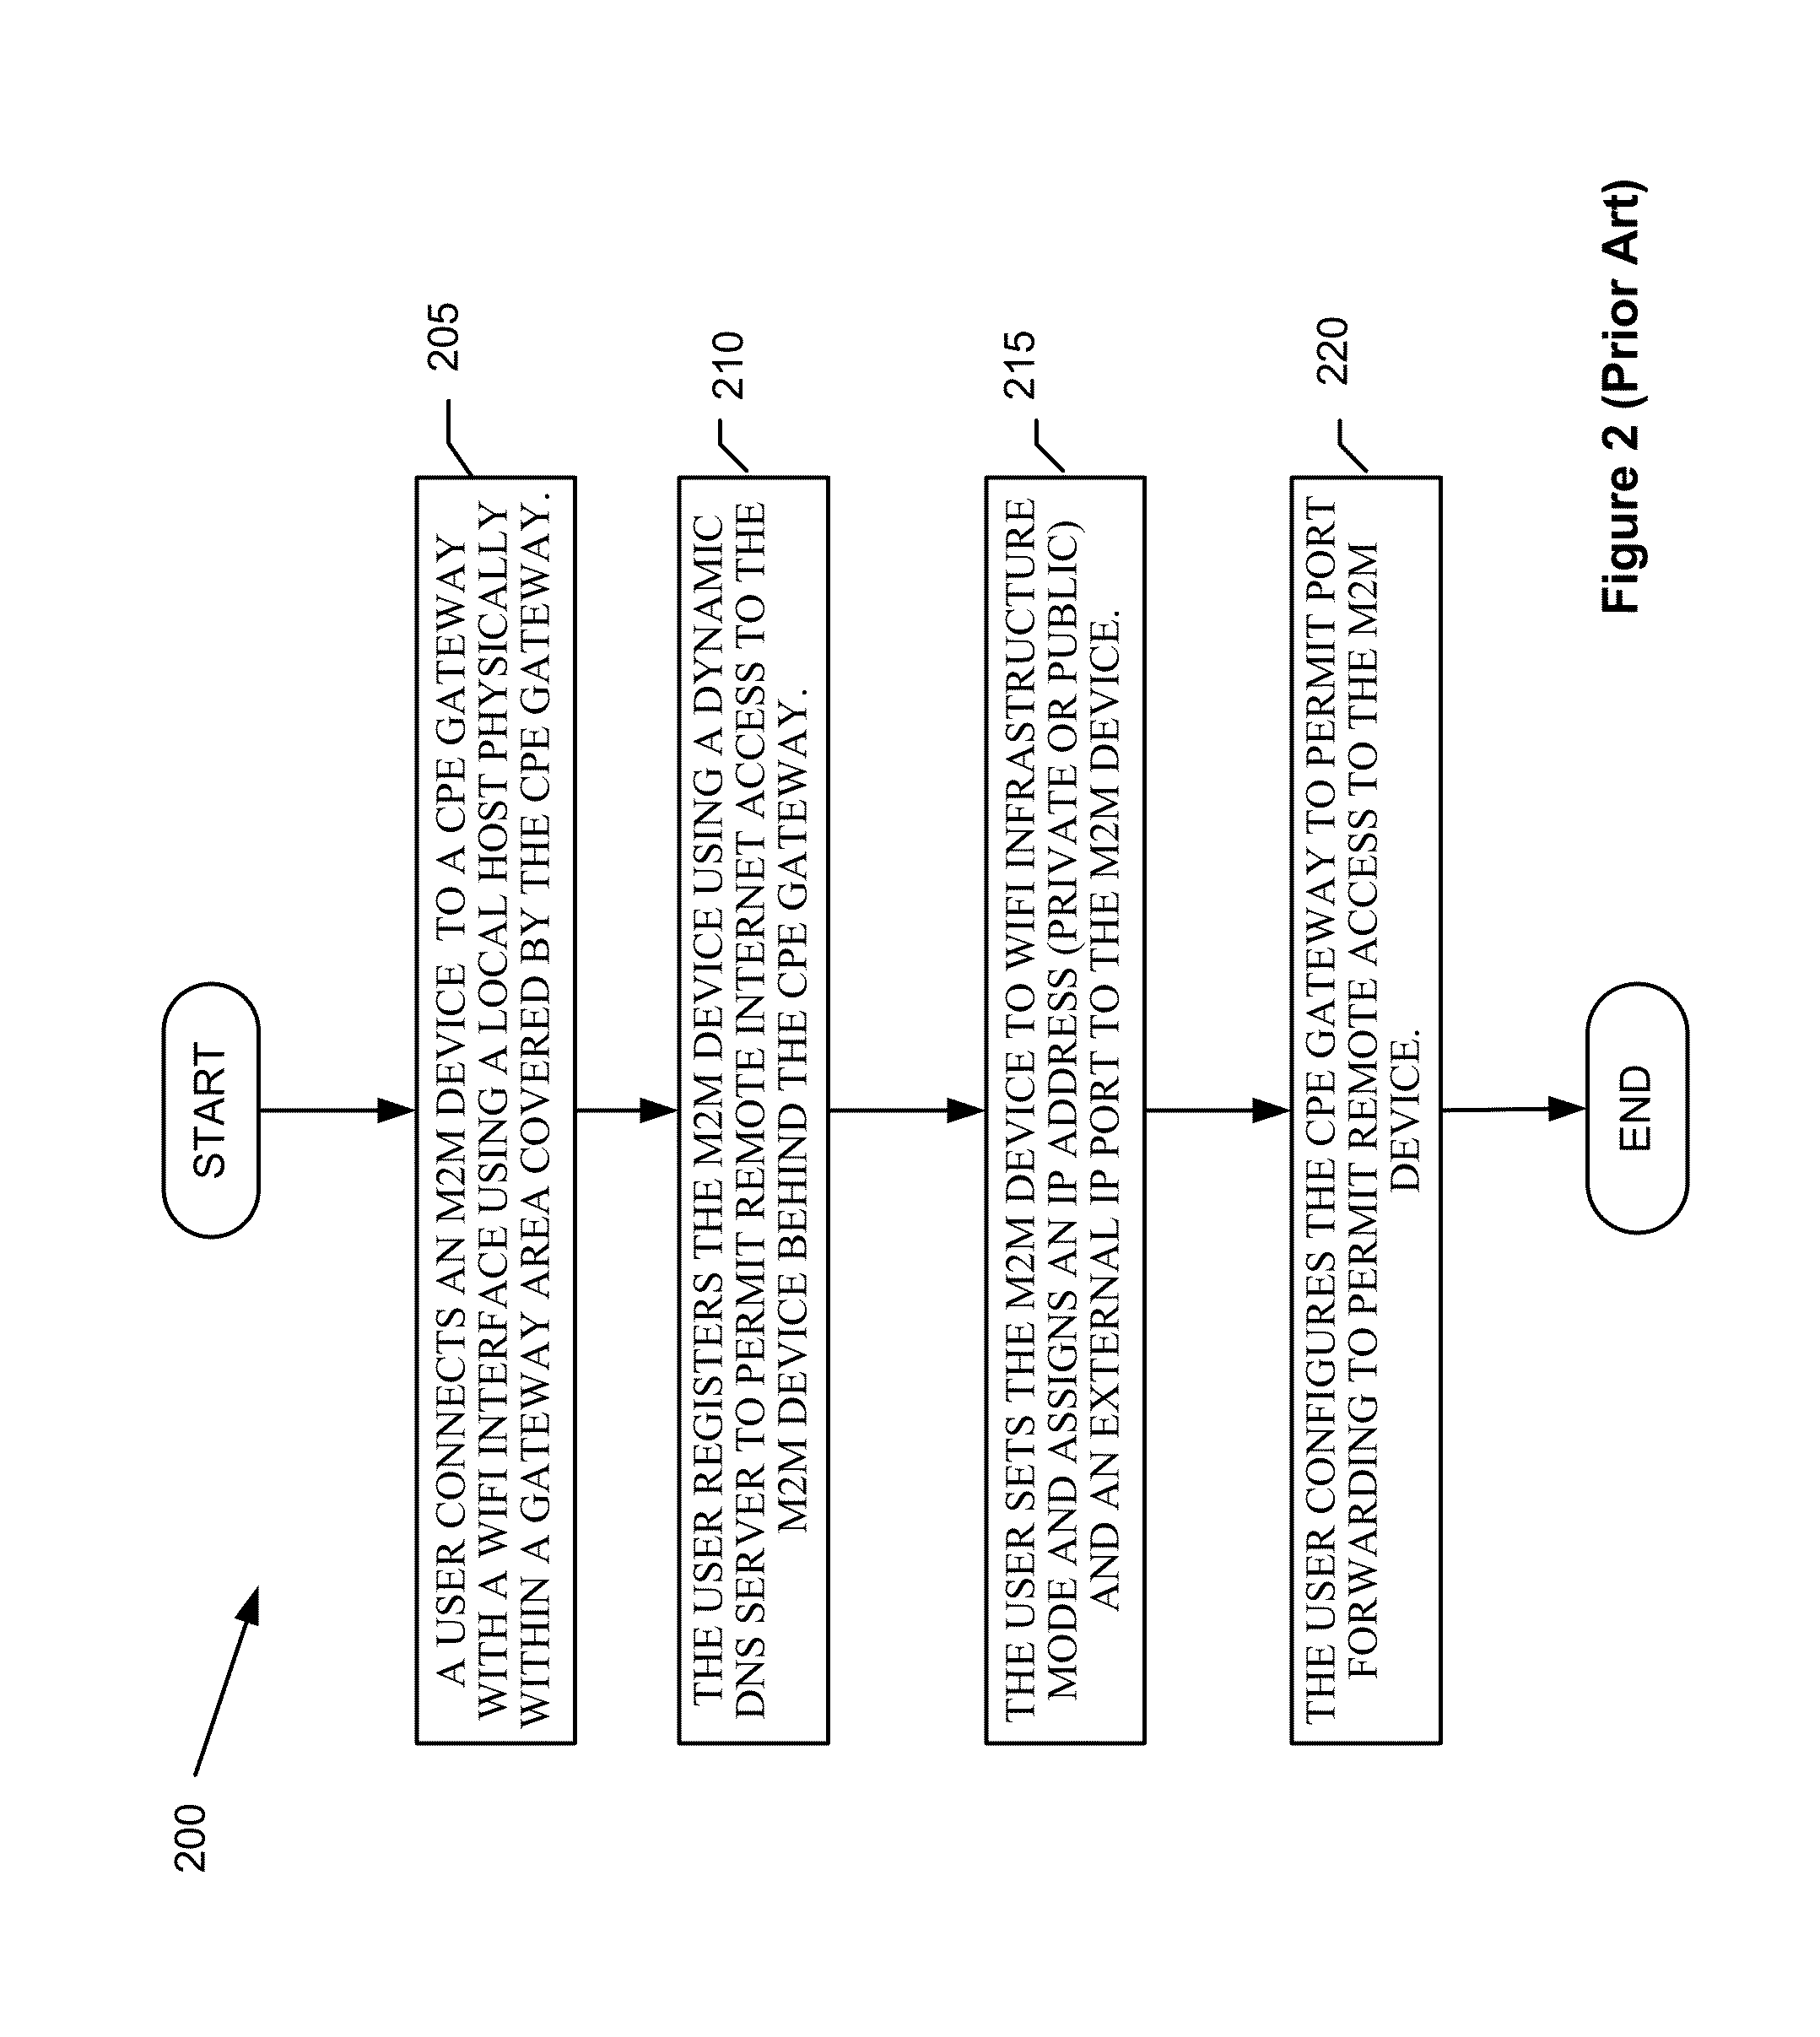 Automatic provisioning of an m2m device having a WIFI interface